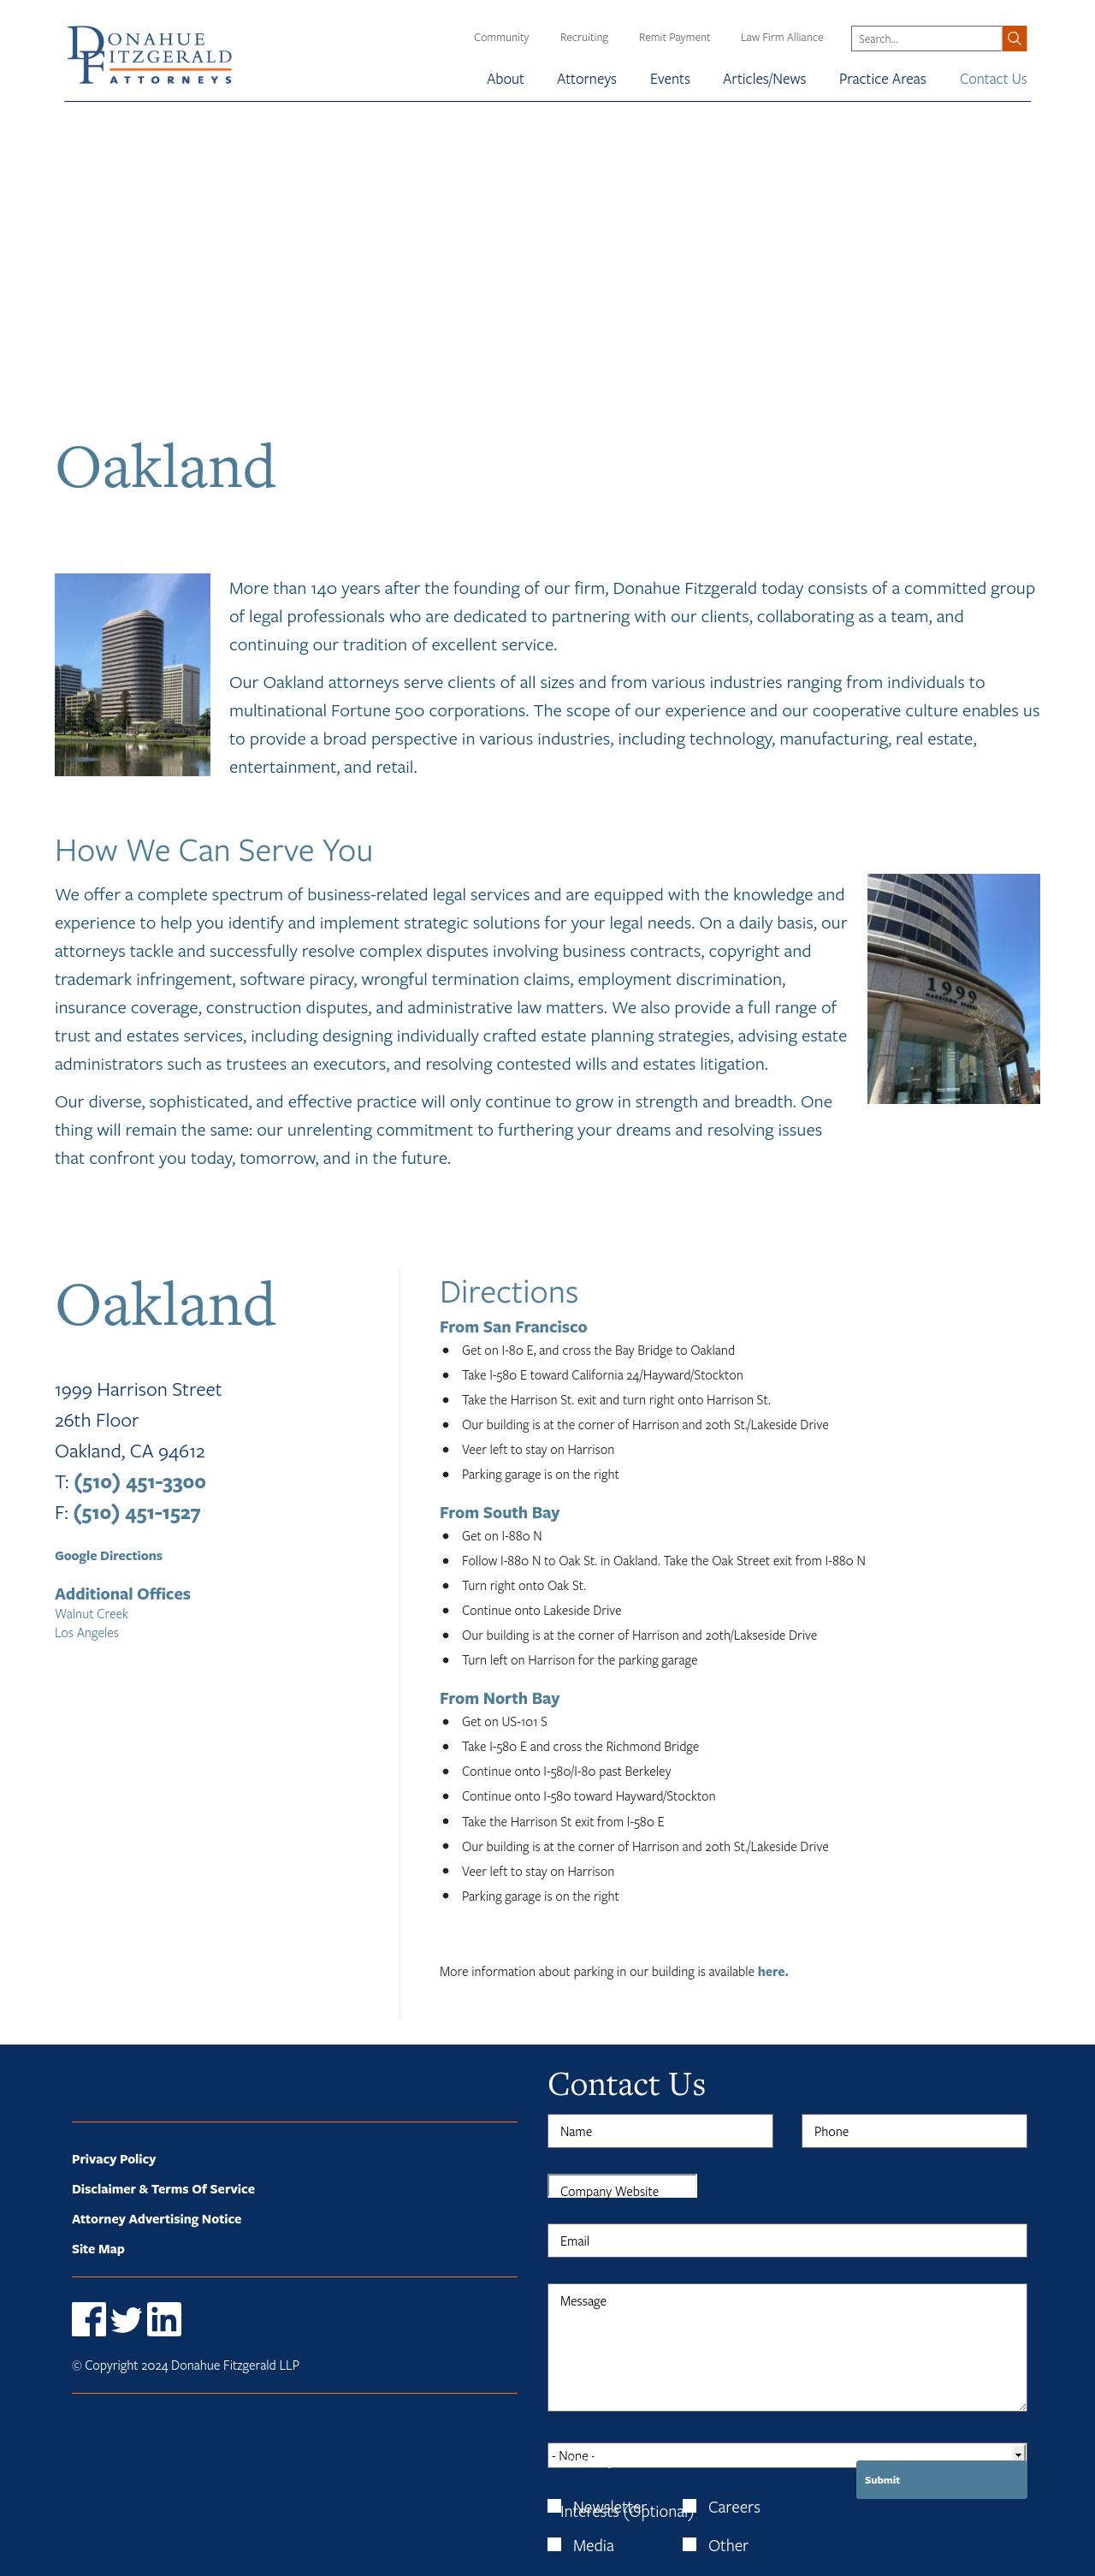 Donahue Fitzgerald of Oakland - Oakland CA Lawyers